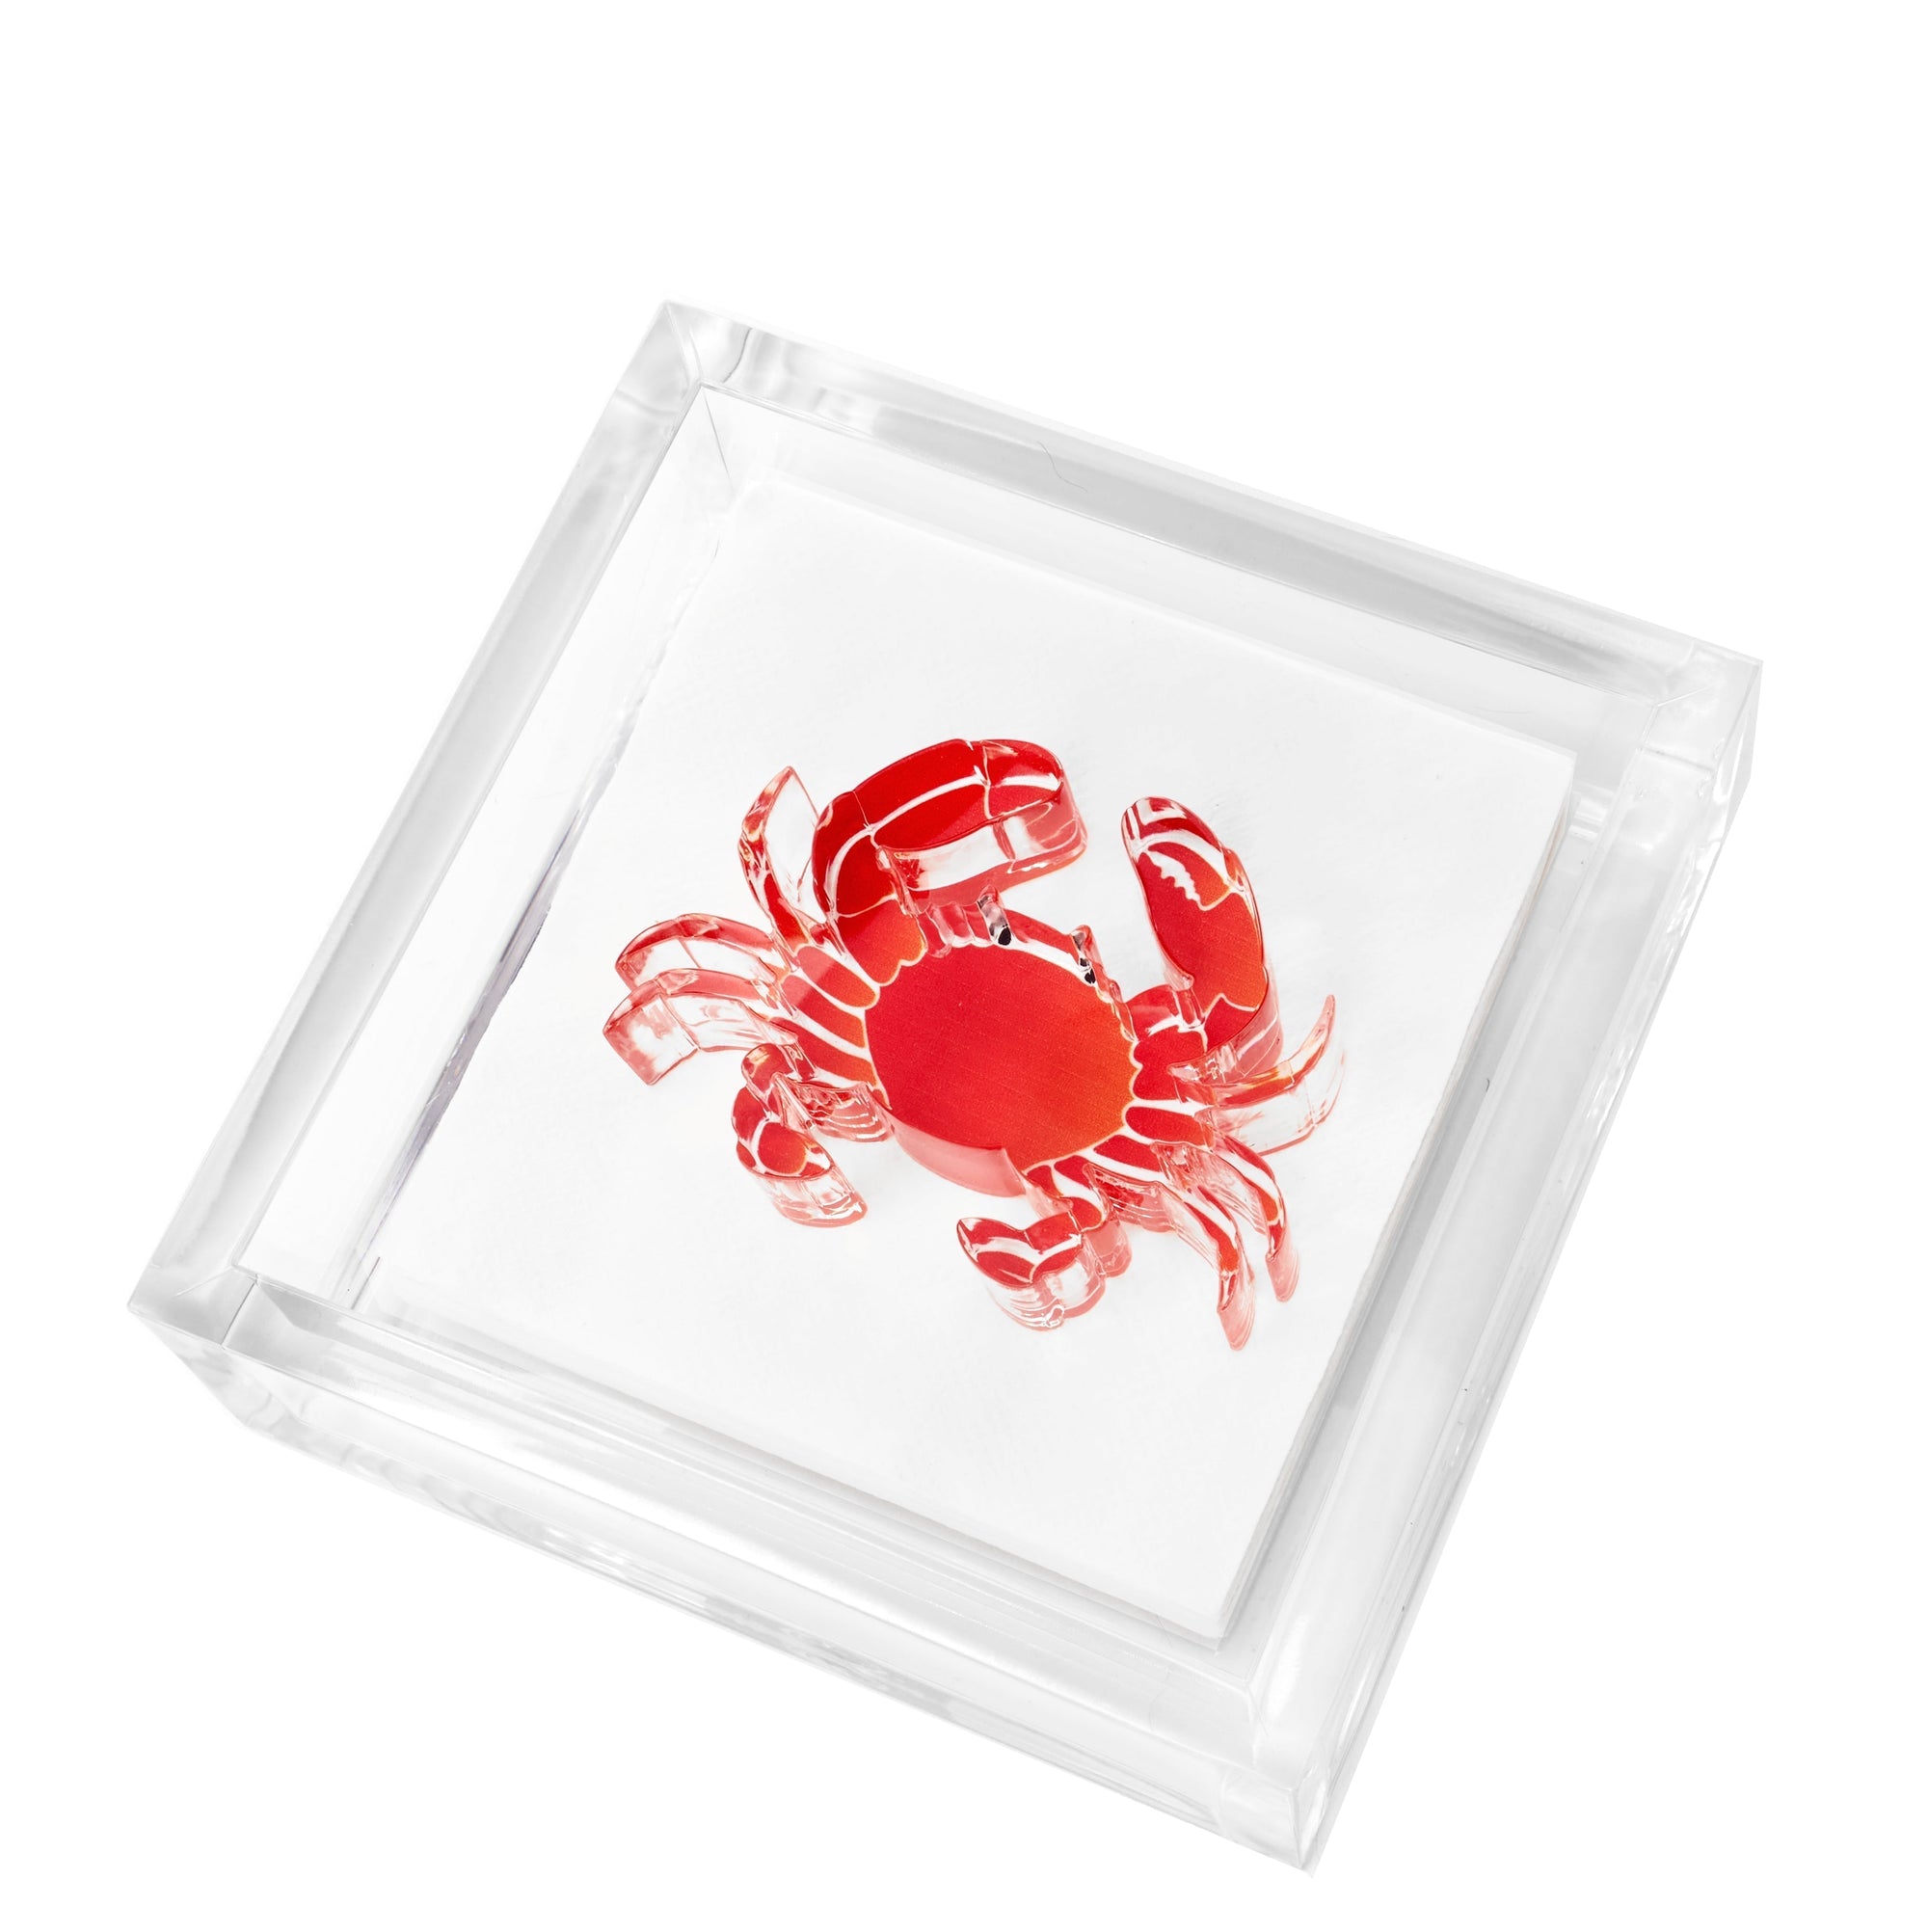 Cocktail Napkin Holder CRAB 4 inches by 4 inches 